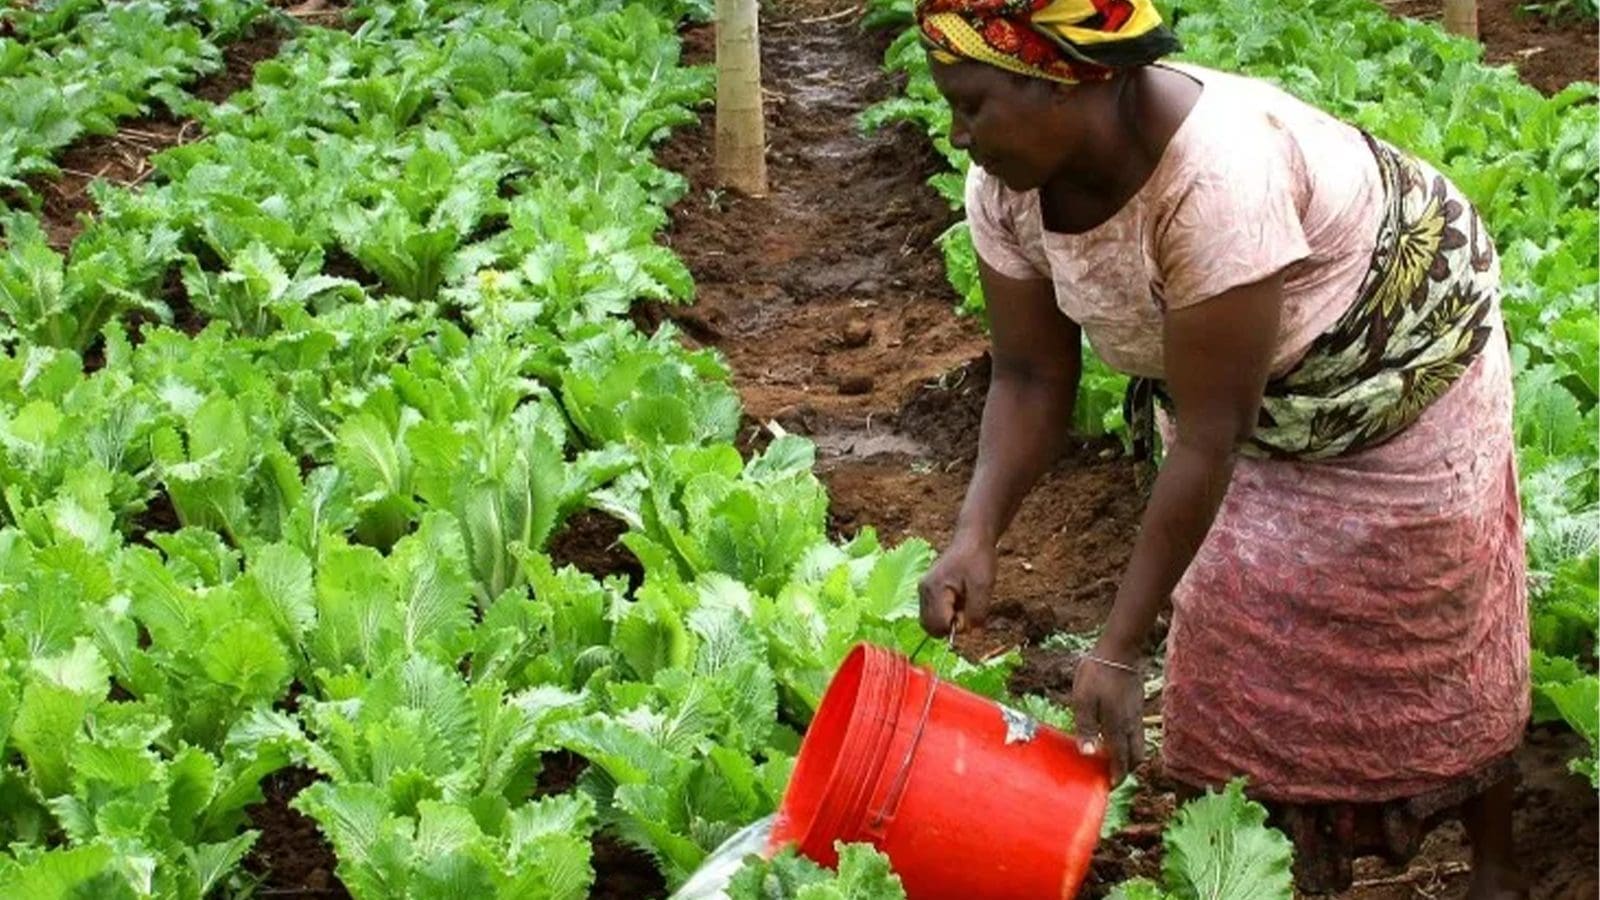 WorldVeg, IFDC join forces to revolutionize crop research, nutrition in Tanzania